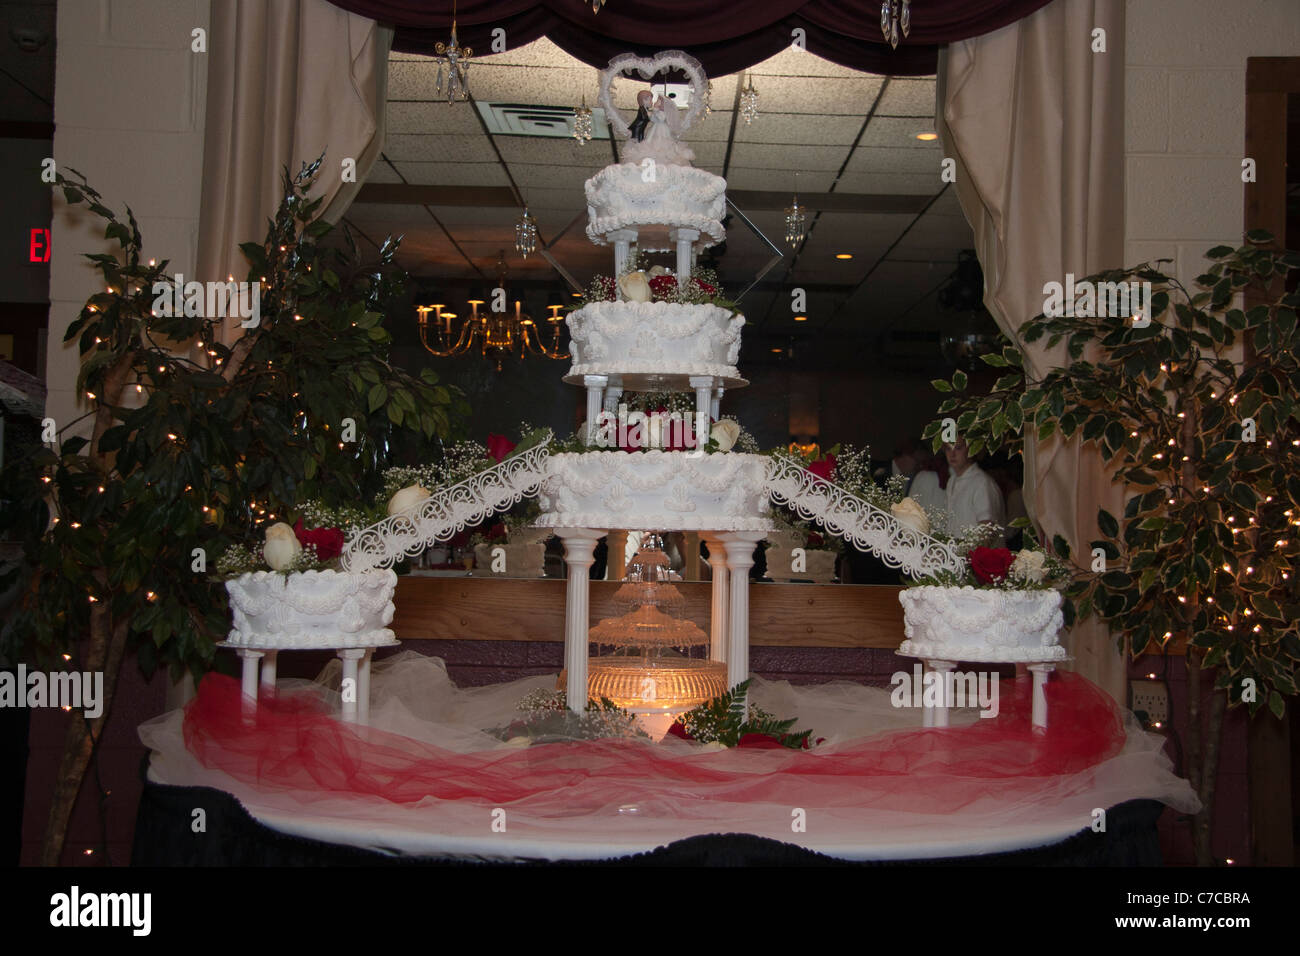 Large multi-tiered cake with lit fountain under neath and bride and broom figurines topper displayed on table during reception Stock Photo